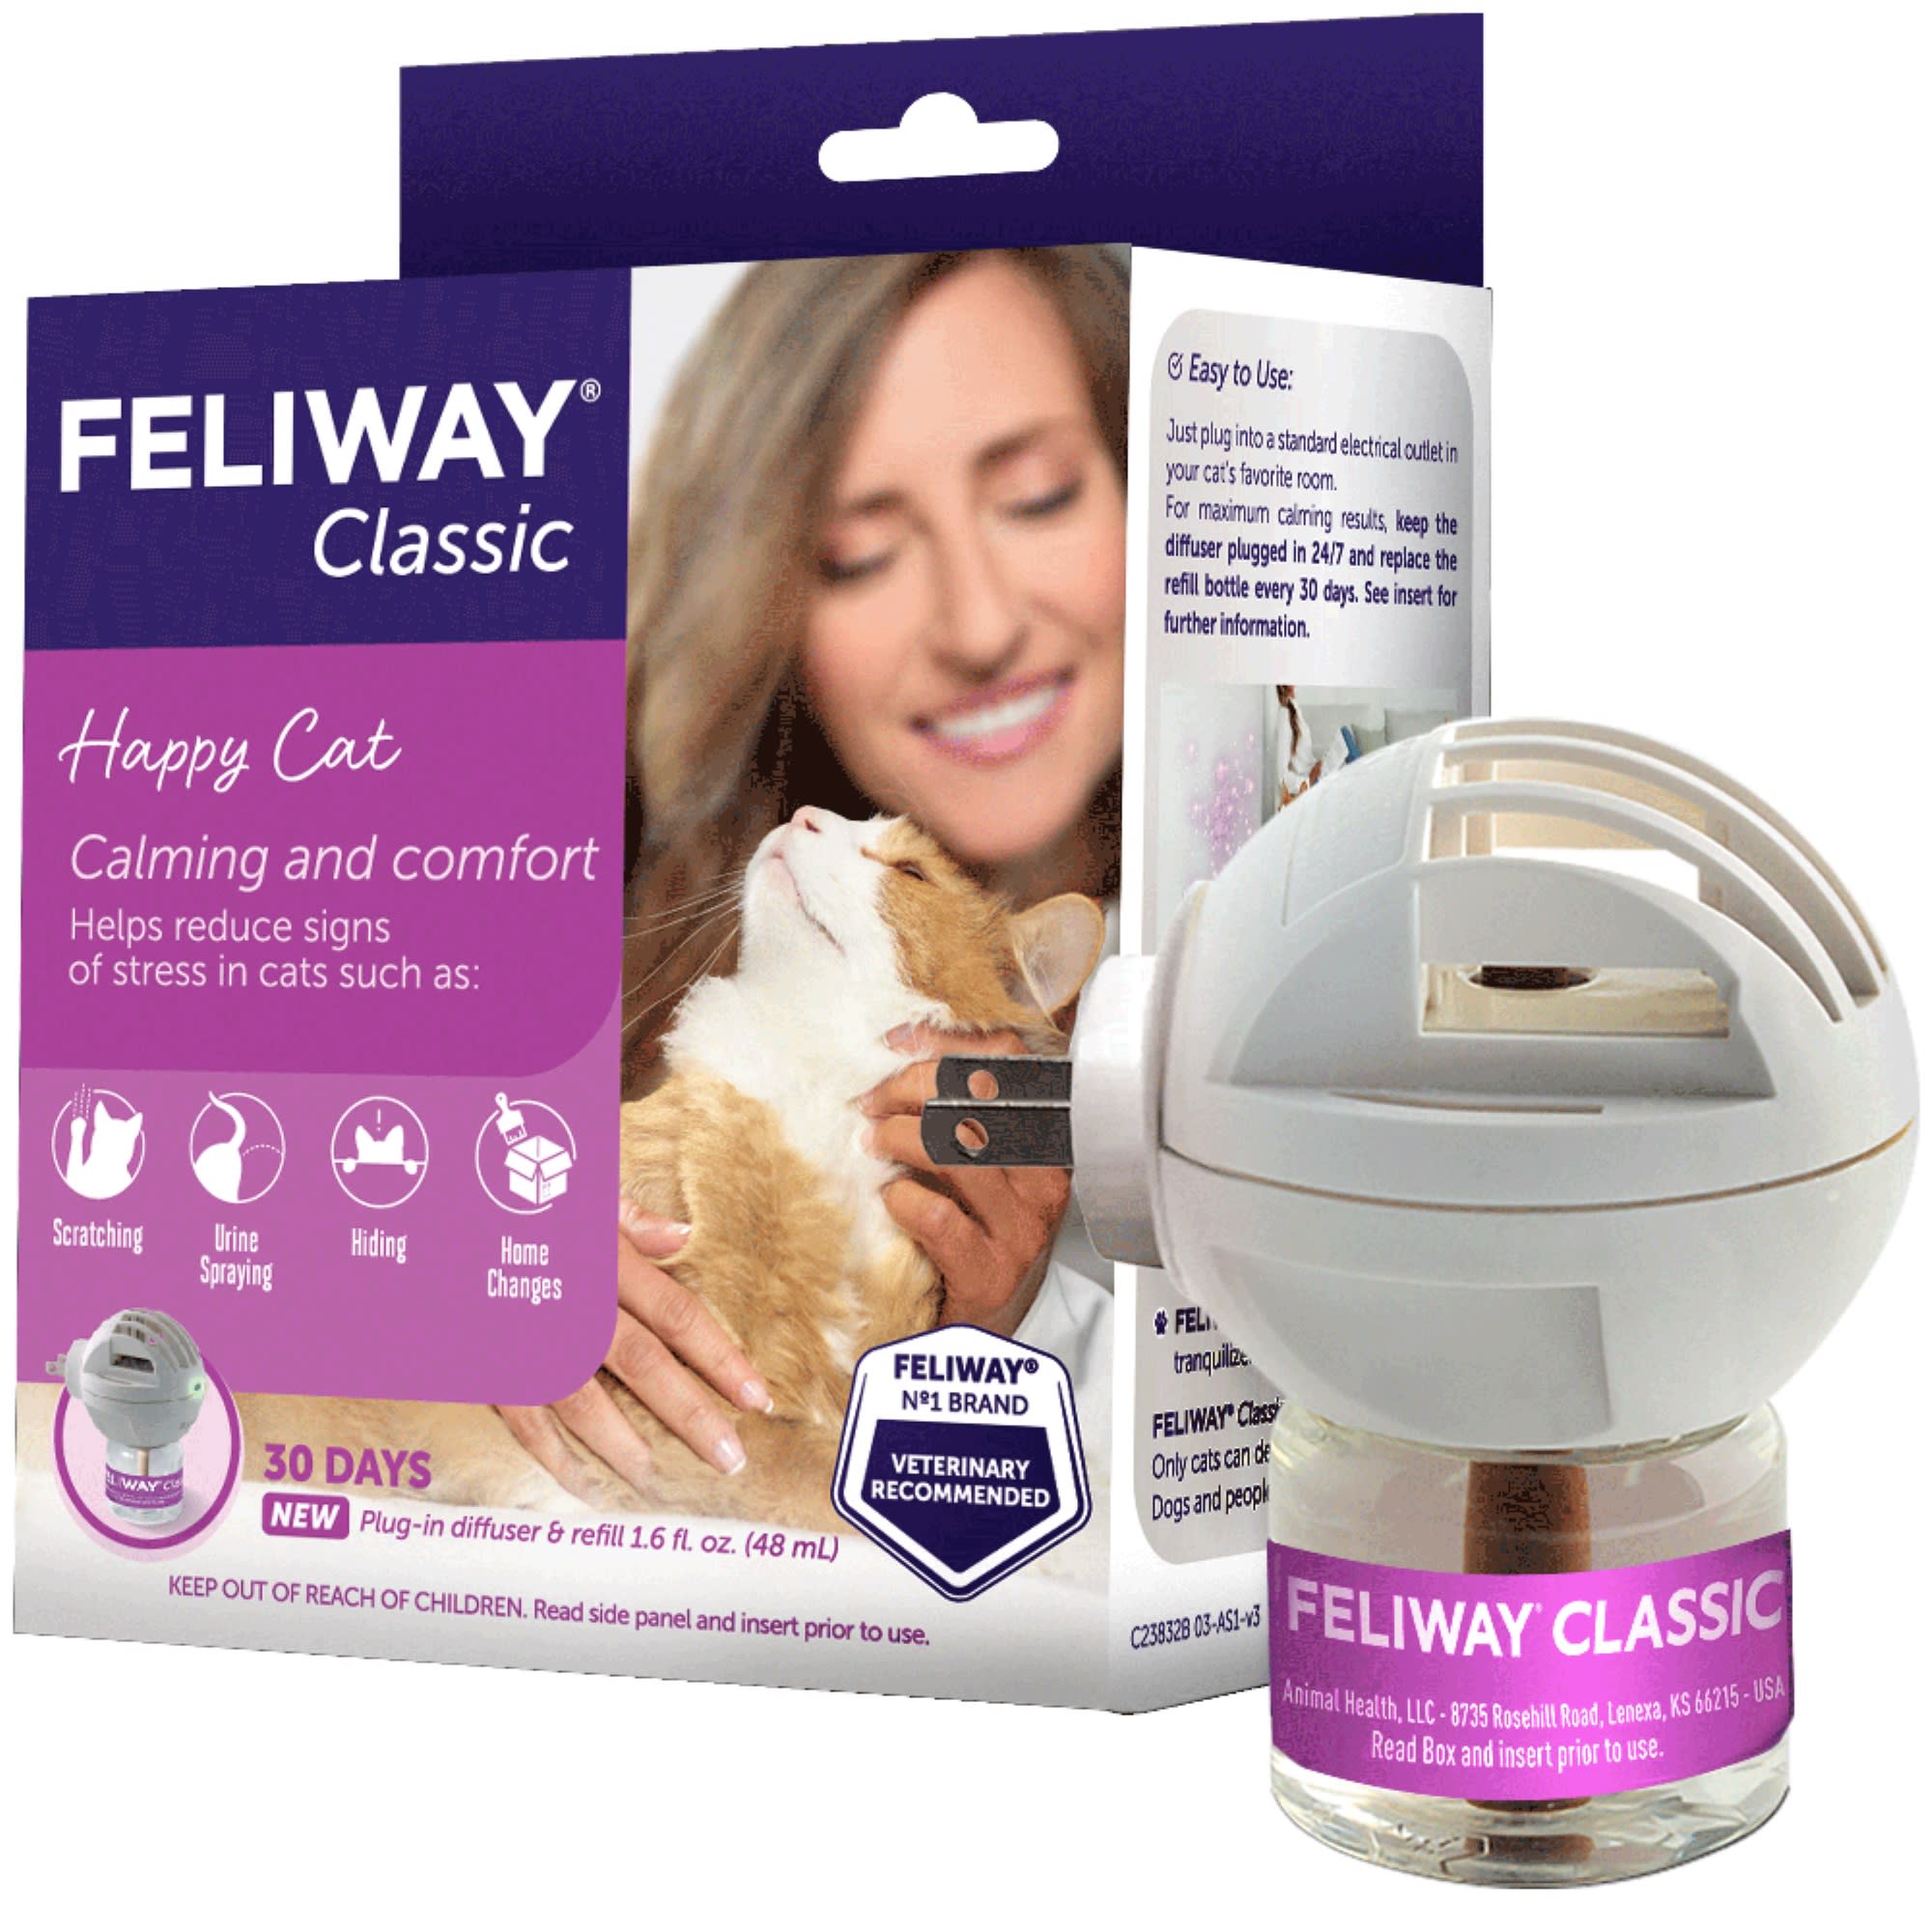 Feliway Classic 30 Day Starter Kit Plug-In Diffuser & Refill for Cat